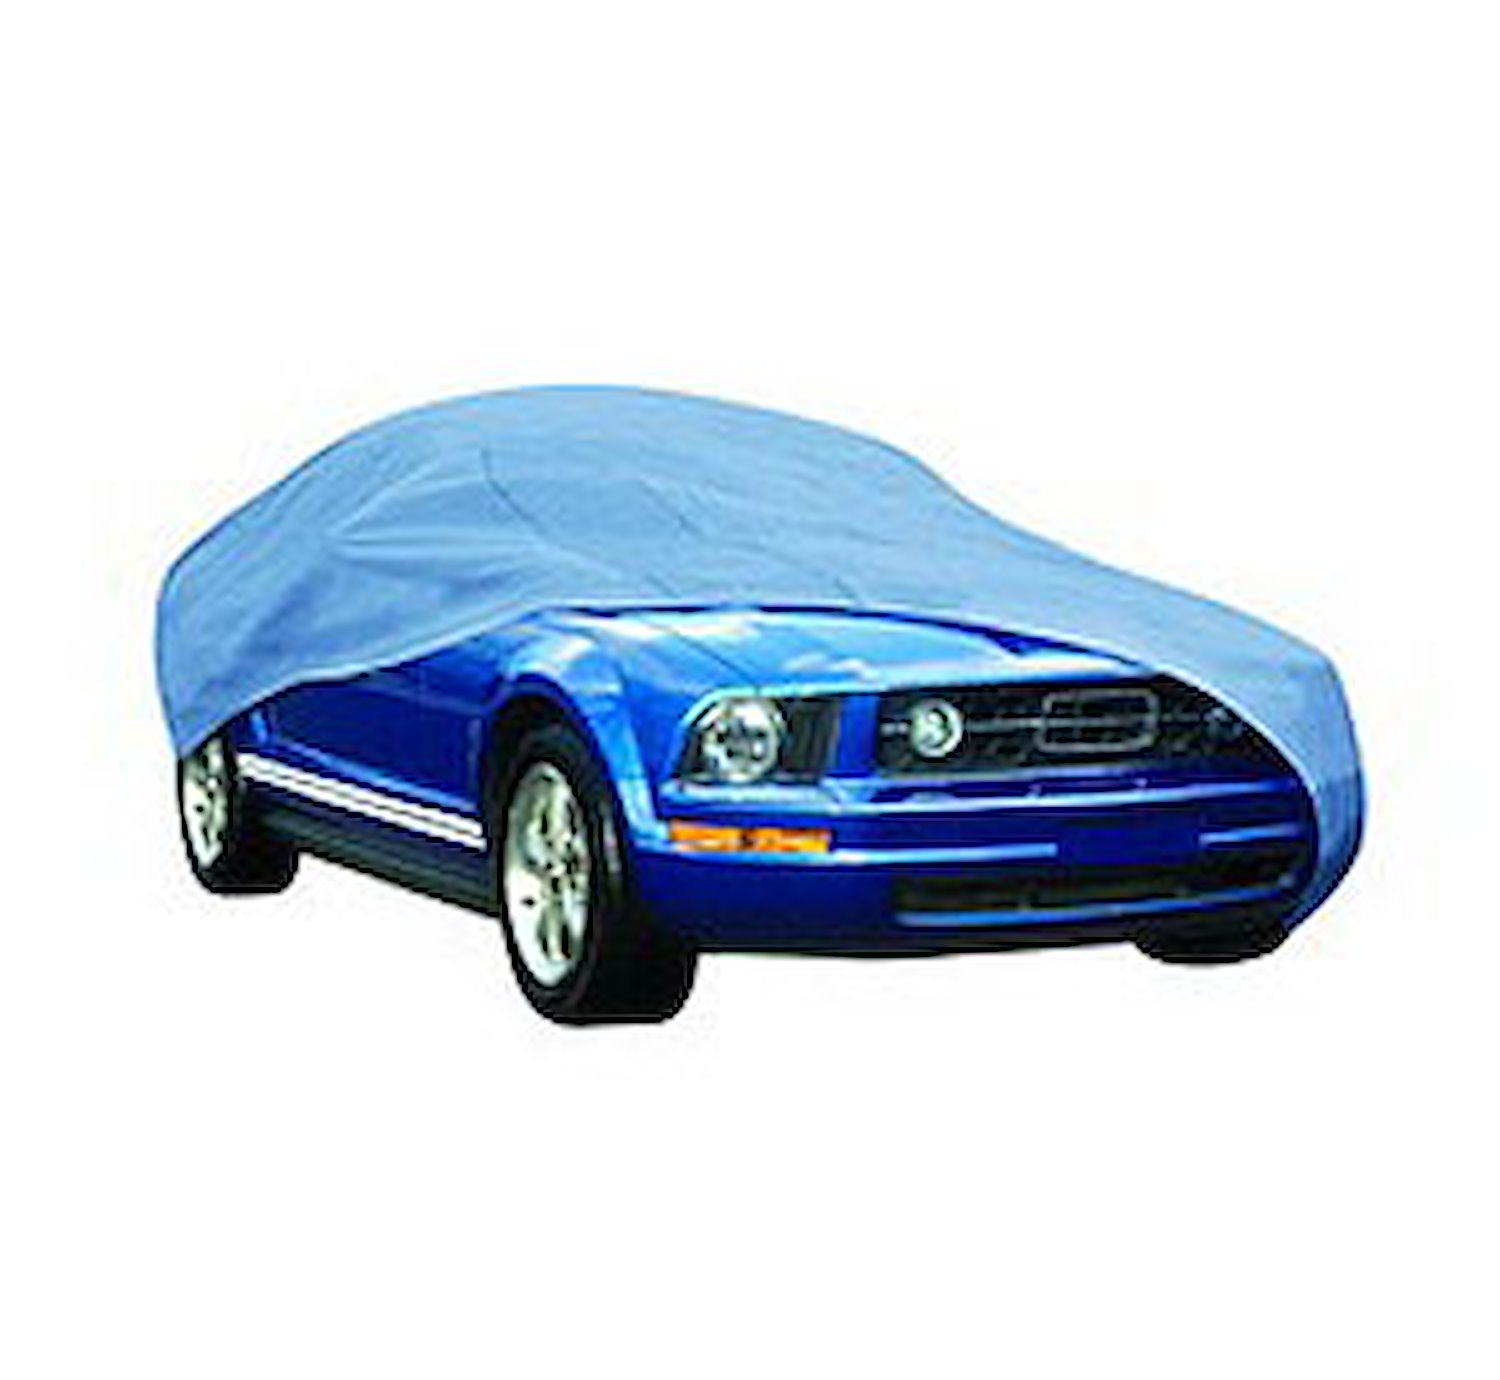 Duro Car Cover Fits Cars Up To 22" in Length